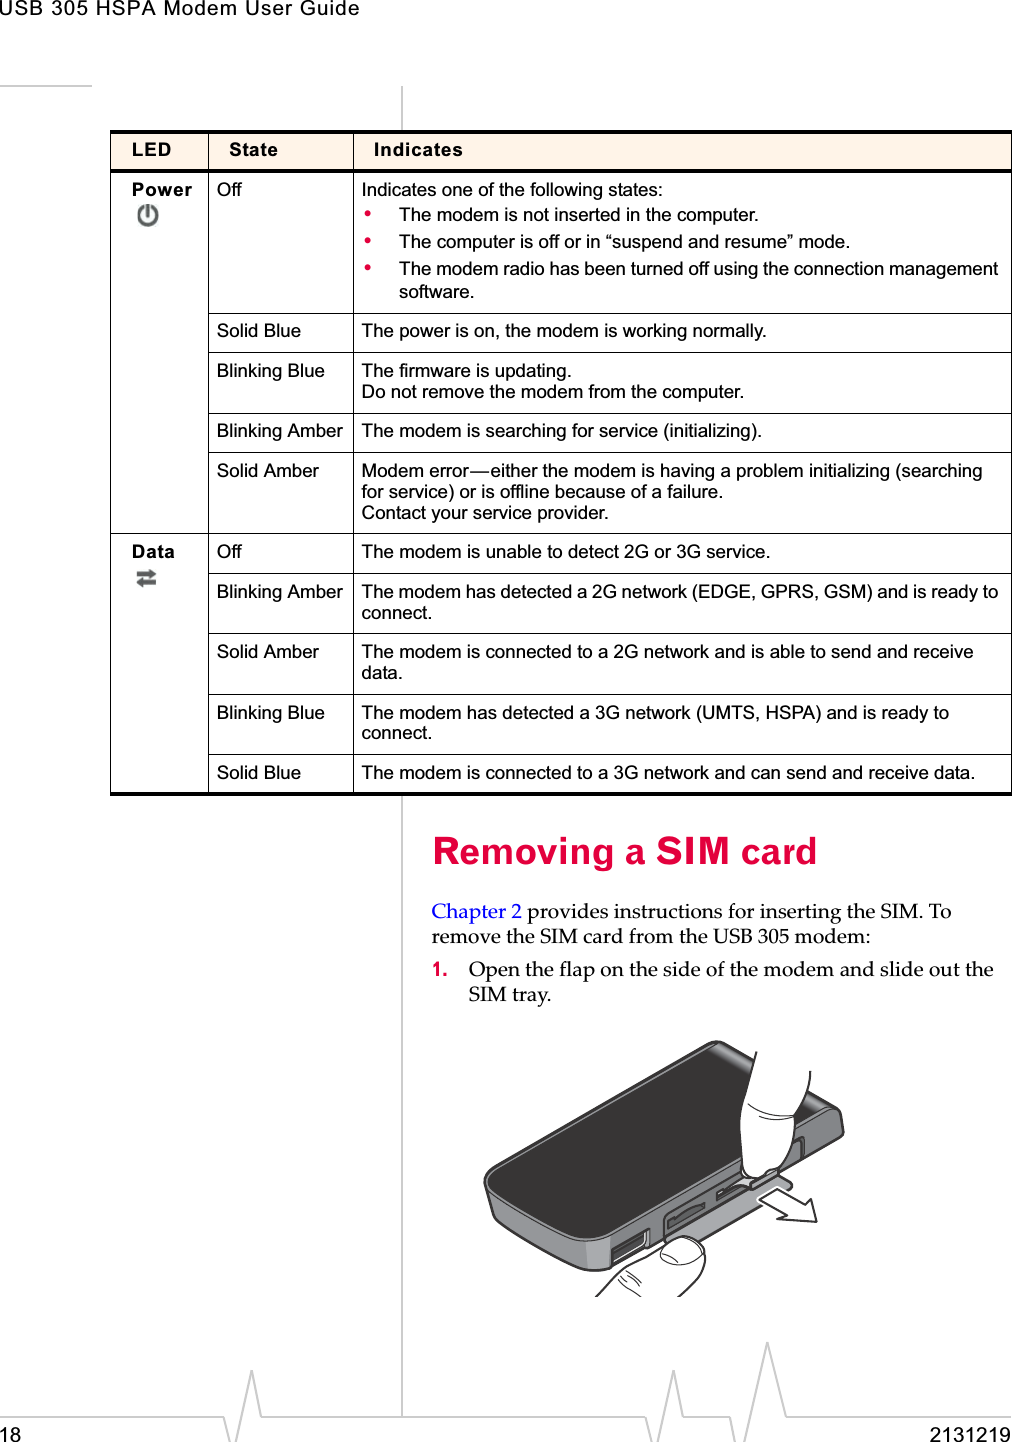 USB 305 HSPA Modem User Guide18 2131219Removing a SIM cardChapter 2ȱprovidesȱinstructionsȱforȱinsertingȱtheȱSIM.ȱToȱremoveȱtheȱSIMȱcardȱfromȱtheȱUSBȱ305ȱmodem:1. OpenȱtheȱflapȱonȱtheȱsideȱofȱtheȱmodemȱandȱslideȱoutȱtheȱSIMȱtray.ȱLED State IndicatesPower Off Indicates one of the following states:•The modem is not inserted in the computer.•The computer is off or in “suspend and resume” mode.•The modem radio has been turned off using the connection management software.Solid Blue The power is on, the modem is working normally.Blinking Blue The firmware is updating. Do not remove the modem from the computer.Blinking Amber The modem is searching for service (initializing).Solid Amber Modem error—either the modem is having a problem initializing (searching for service) or is offline because of a failure. Contact your service provider.Data Off The modem is unable to detect 2G or 3G service.Blinking Amber The modem has detected a 2G network (EDGE, GPRS, GSM) and is ready to connect.Solid Amber The modem is connected to a 2G network and is able to send and receive data.Blinking Blue The modem has detected a 3G network (UMTS, HSPA) and is ready to connect. Solid Blue The modem is connected to a 3G network and can send and receive data.